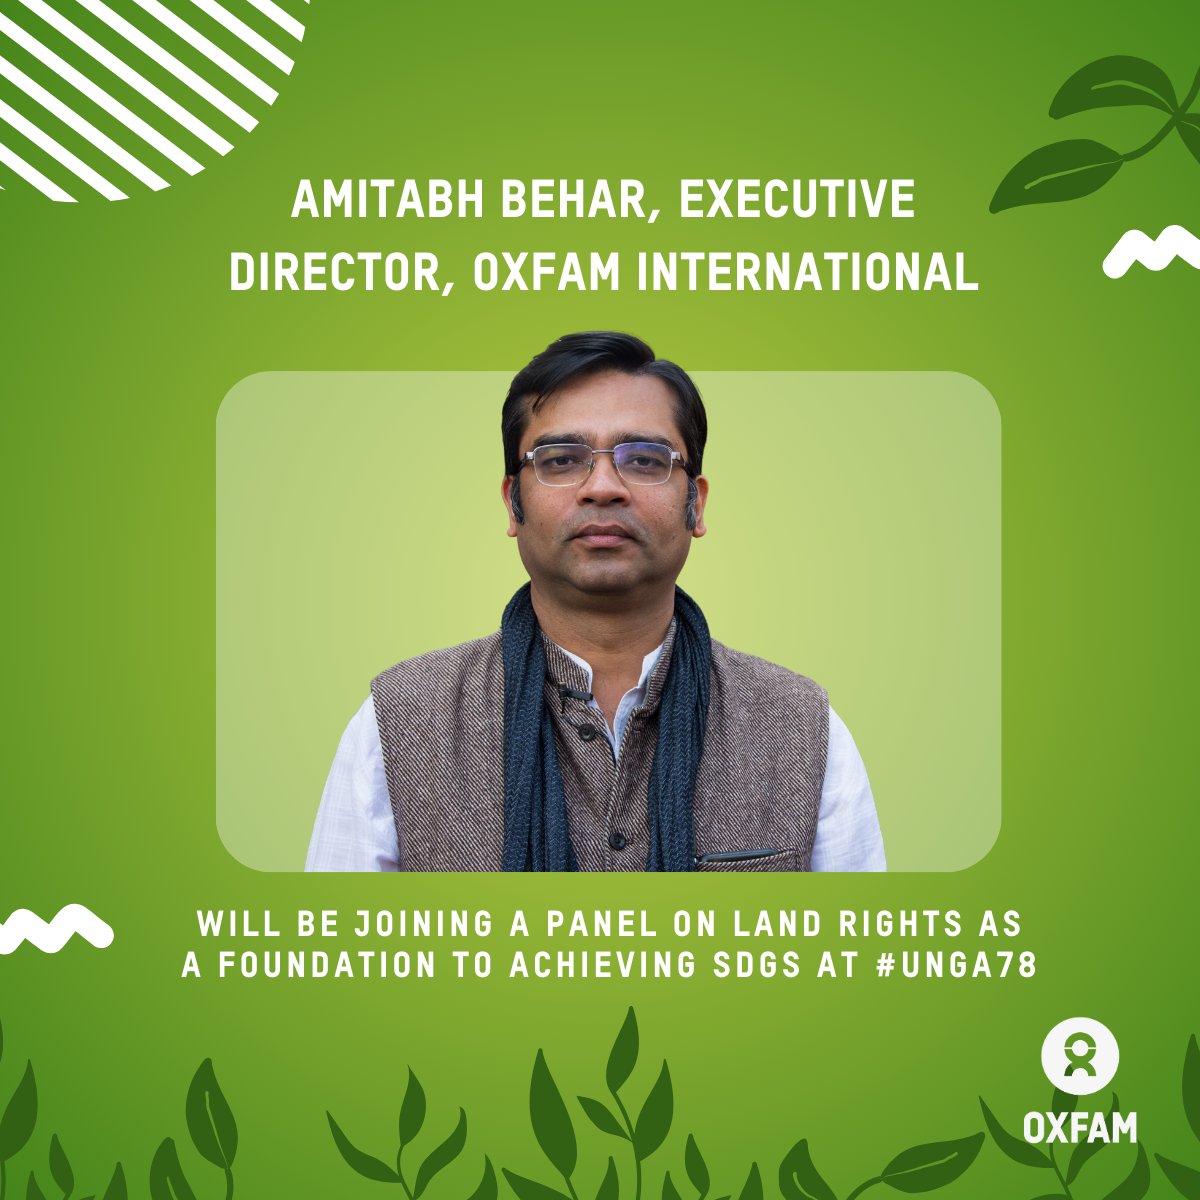 Today at #UNGA78: @AmitabhBehar, Executive Director, Oxfam International will be joining a panel on Land Rights as a Foundation to Achieving SDGs #UNGA #TheFutureisEqual